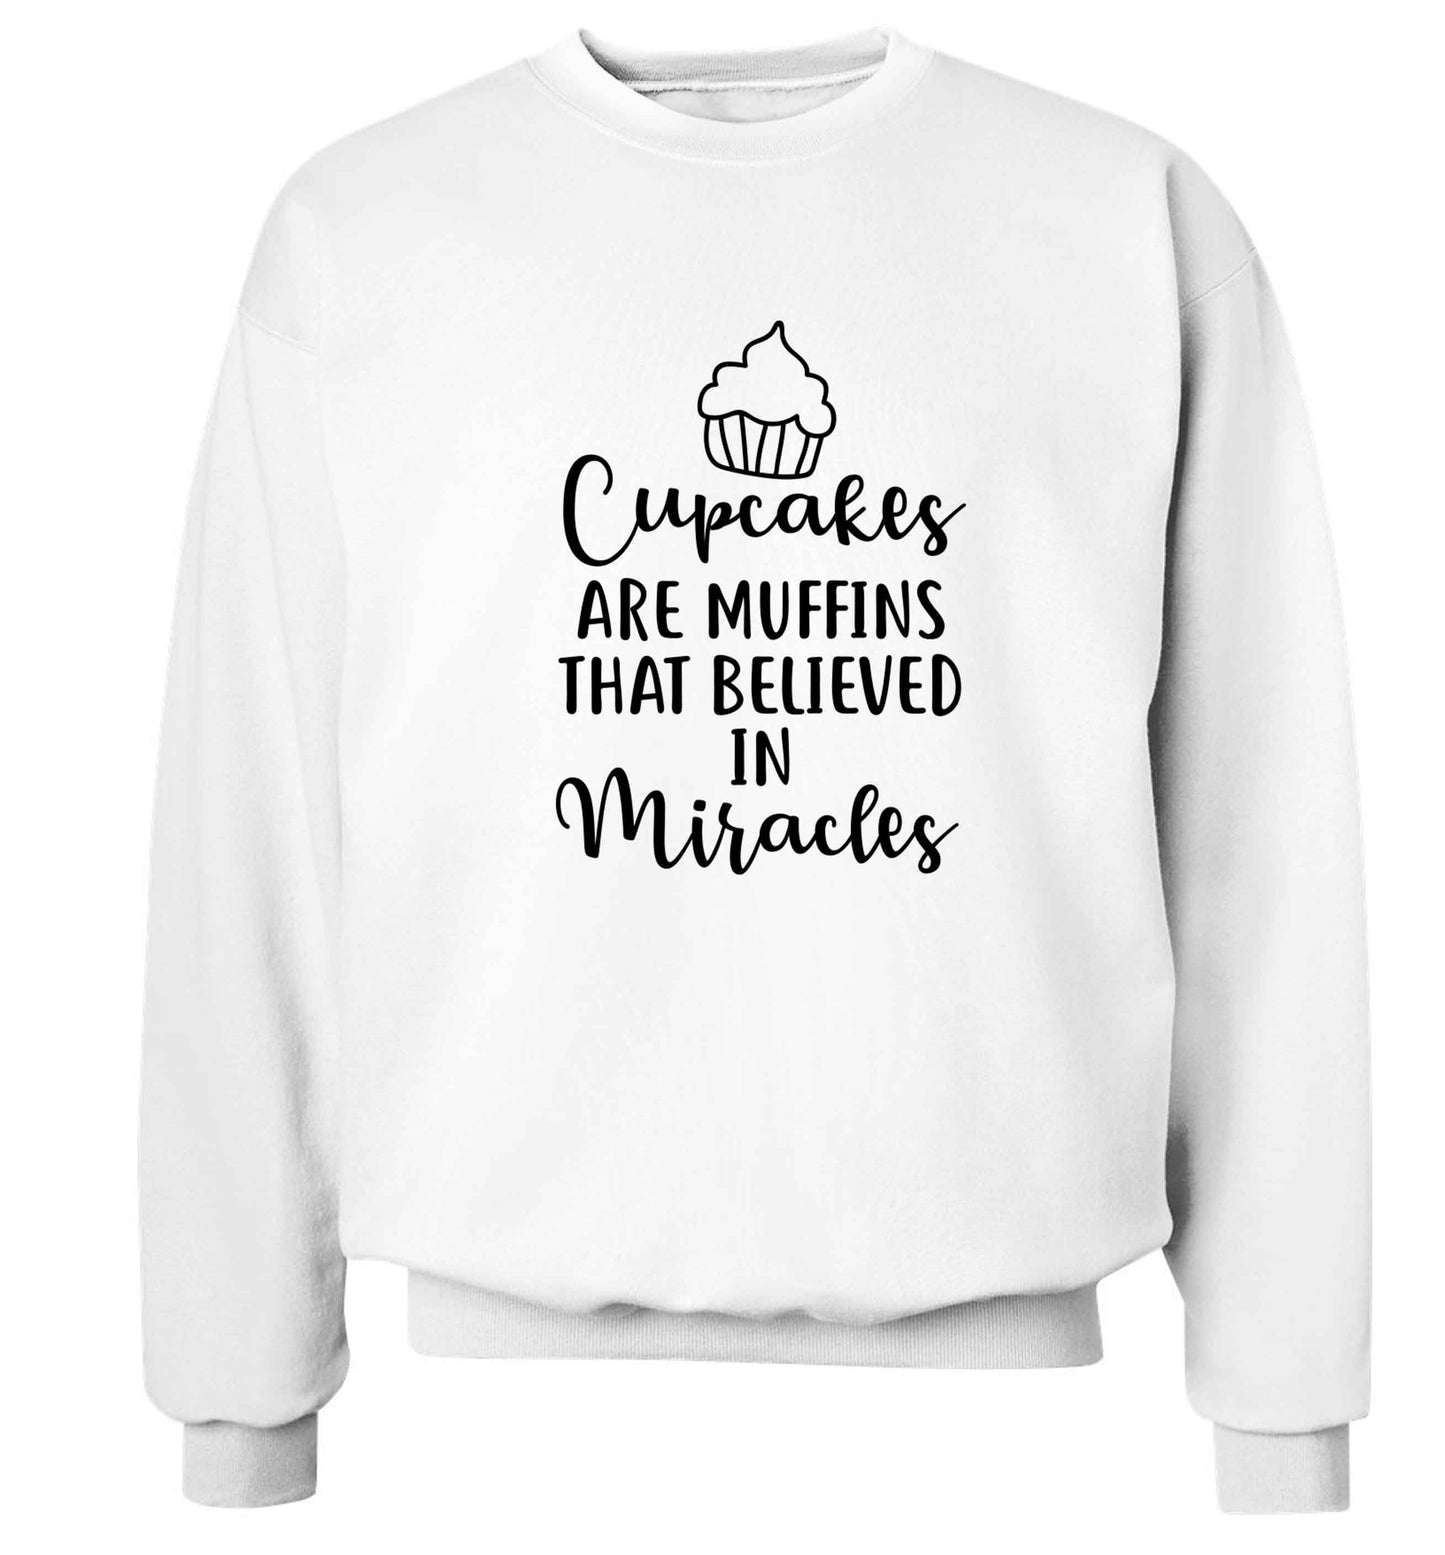 Cupcakes muffins that believed in miracles Adult's unisex white Sweater 2XL